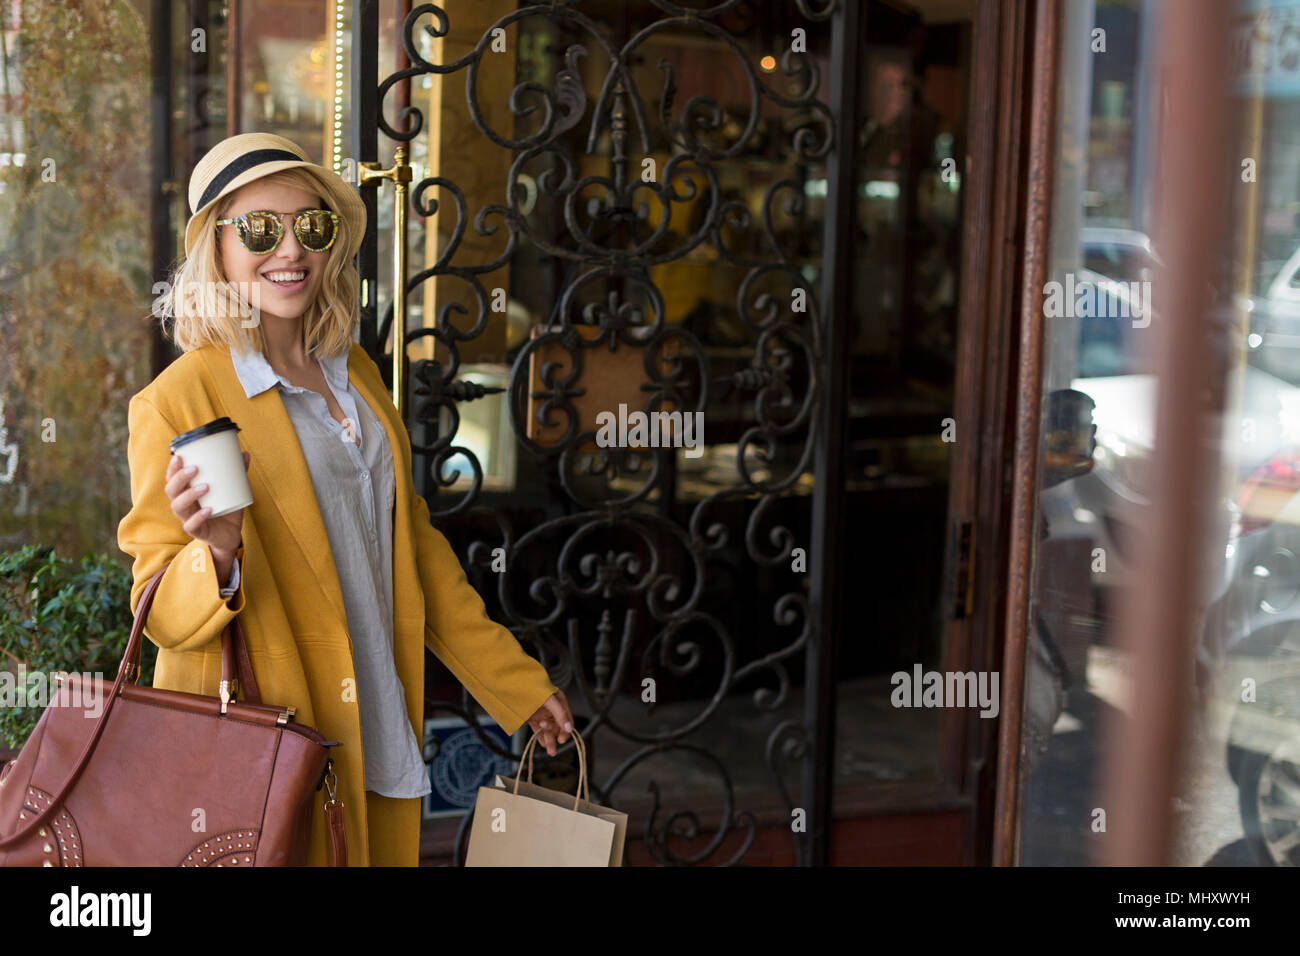 Woman entering restaurant, Cape Town, South Africa Stock Photo